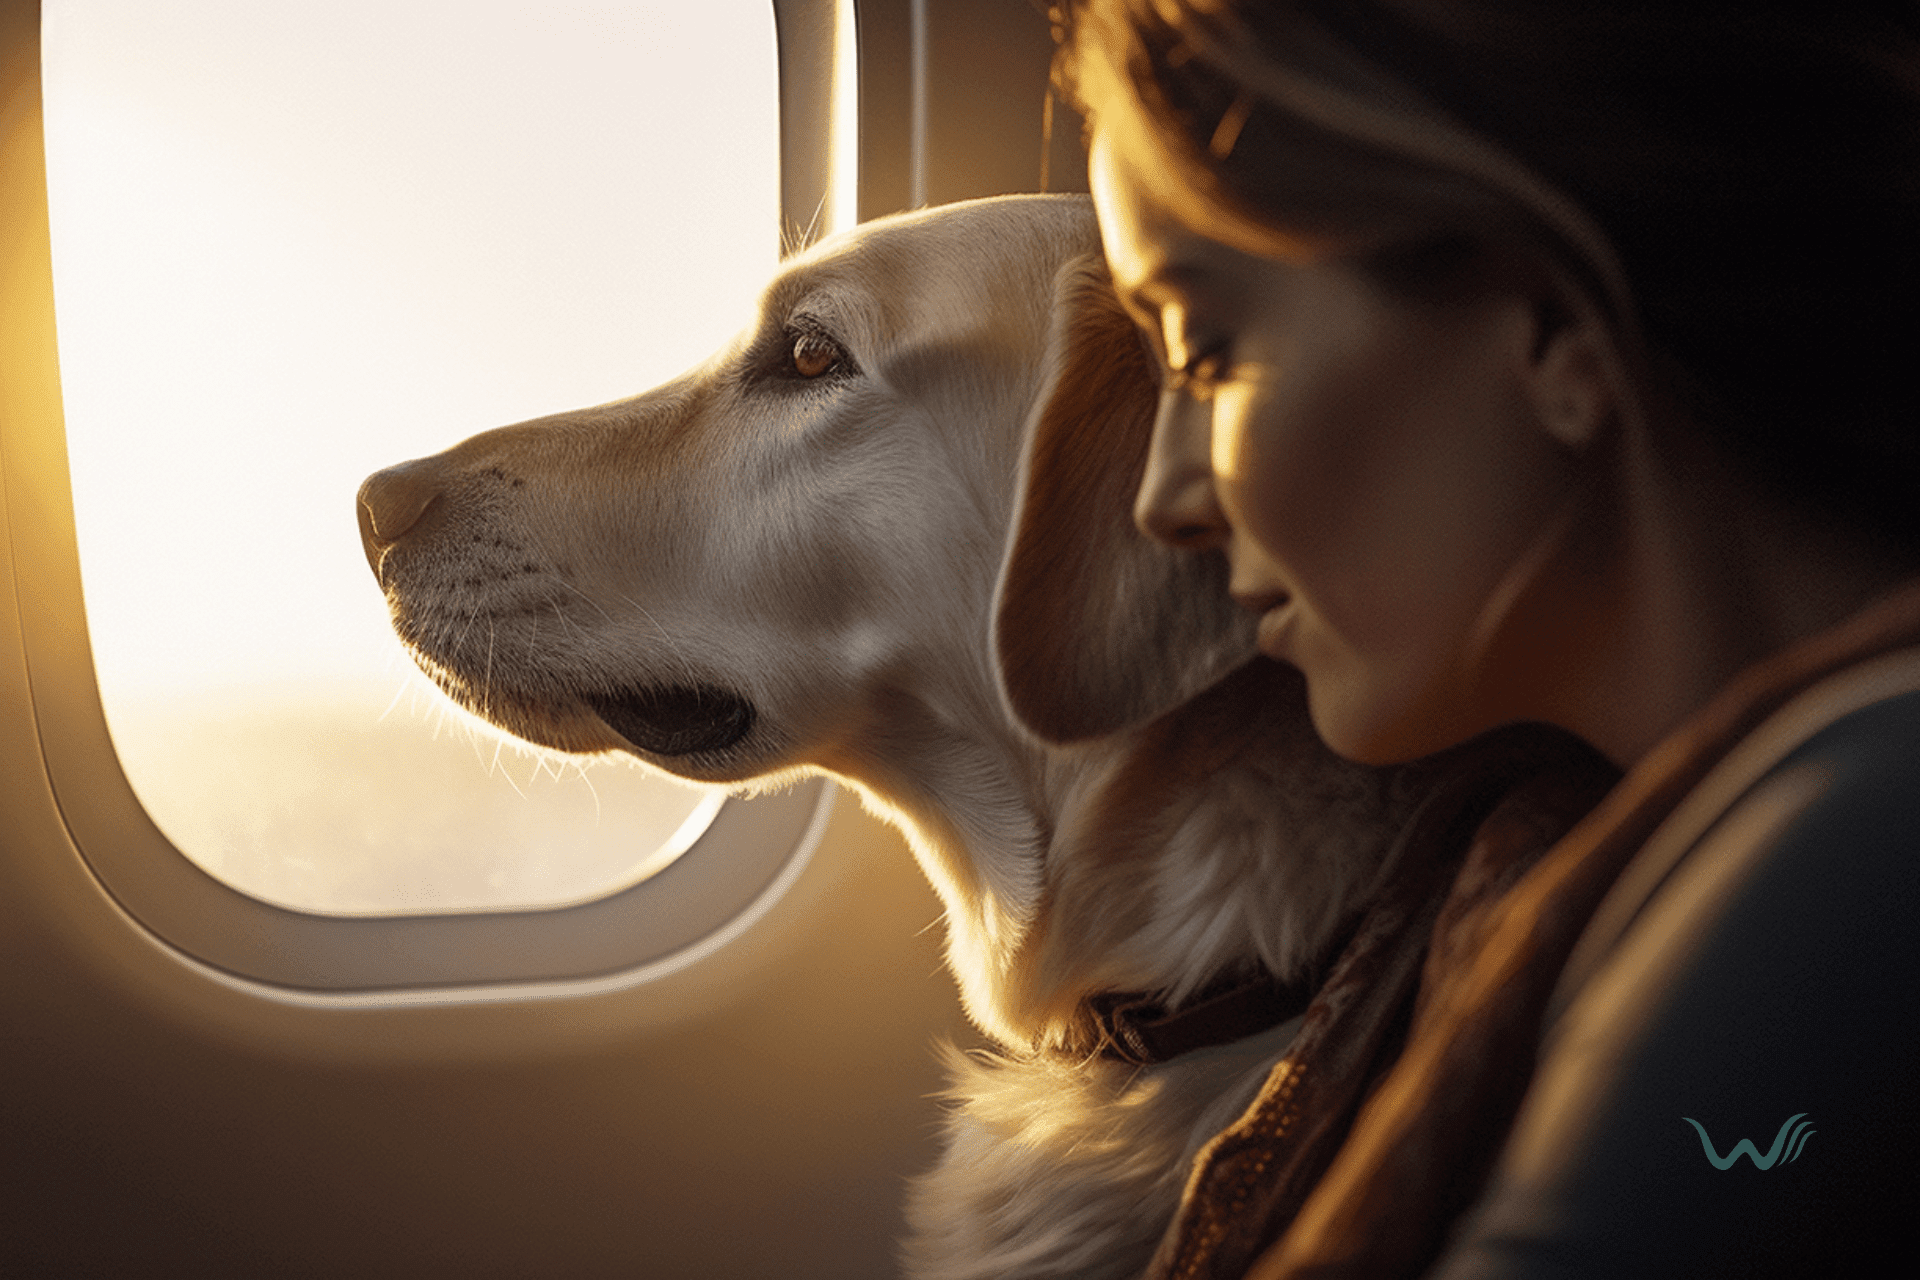 a guide to american airline's pet policy